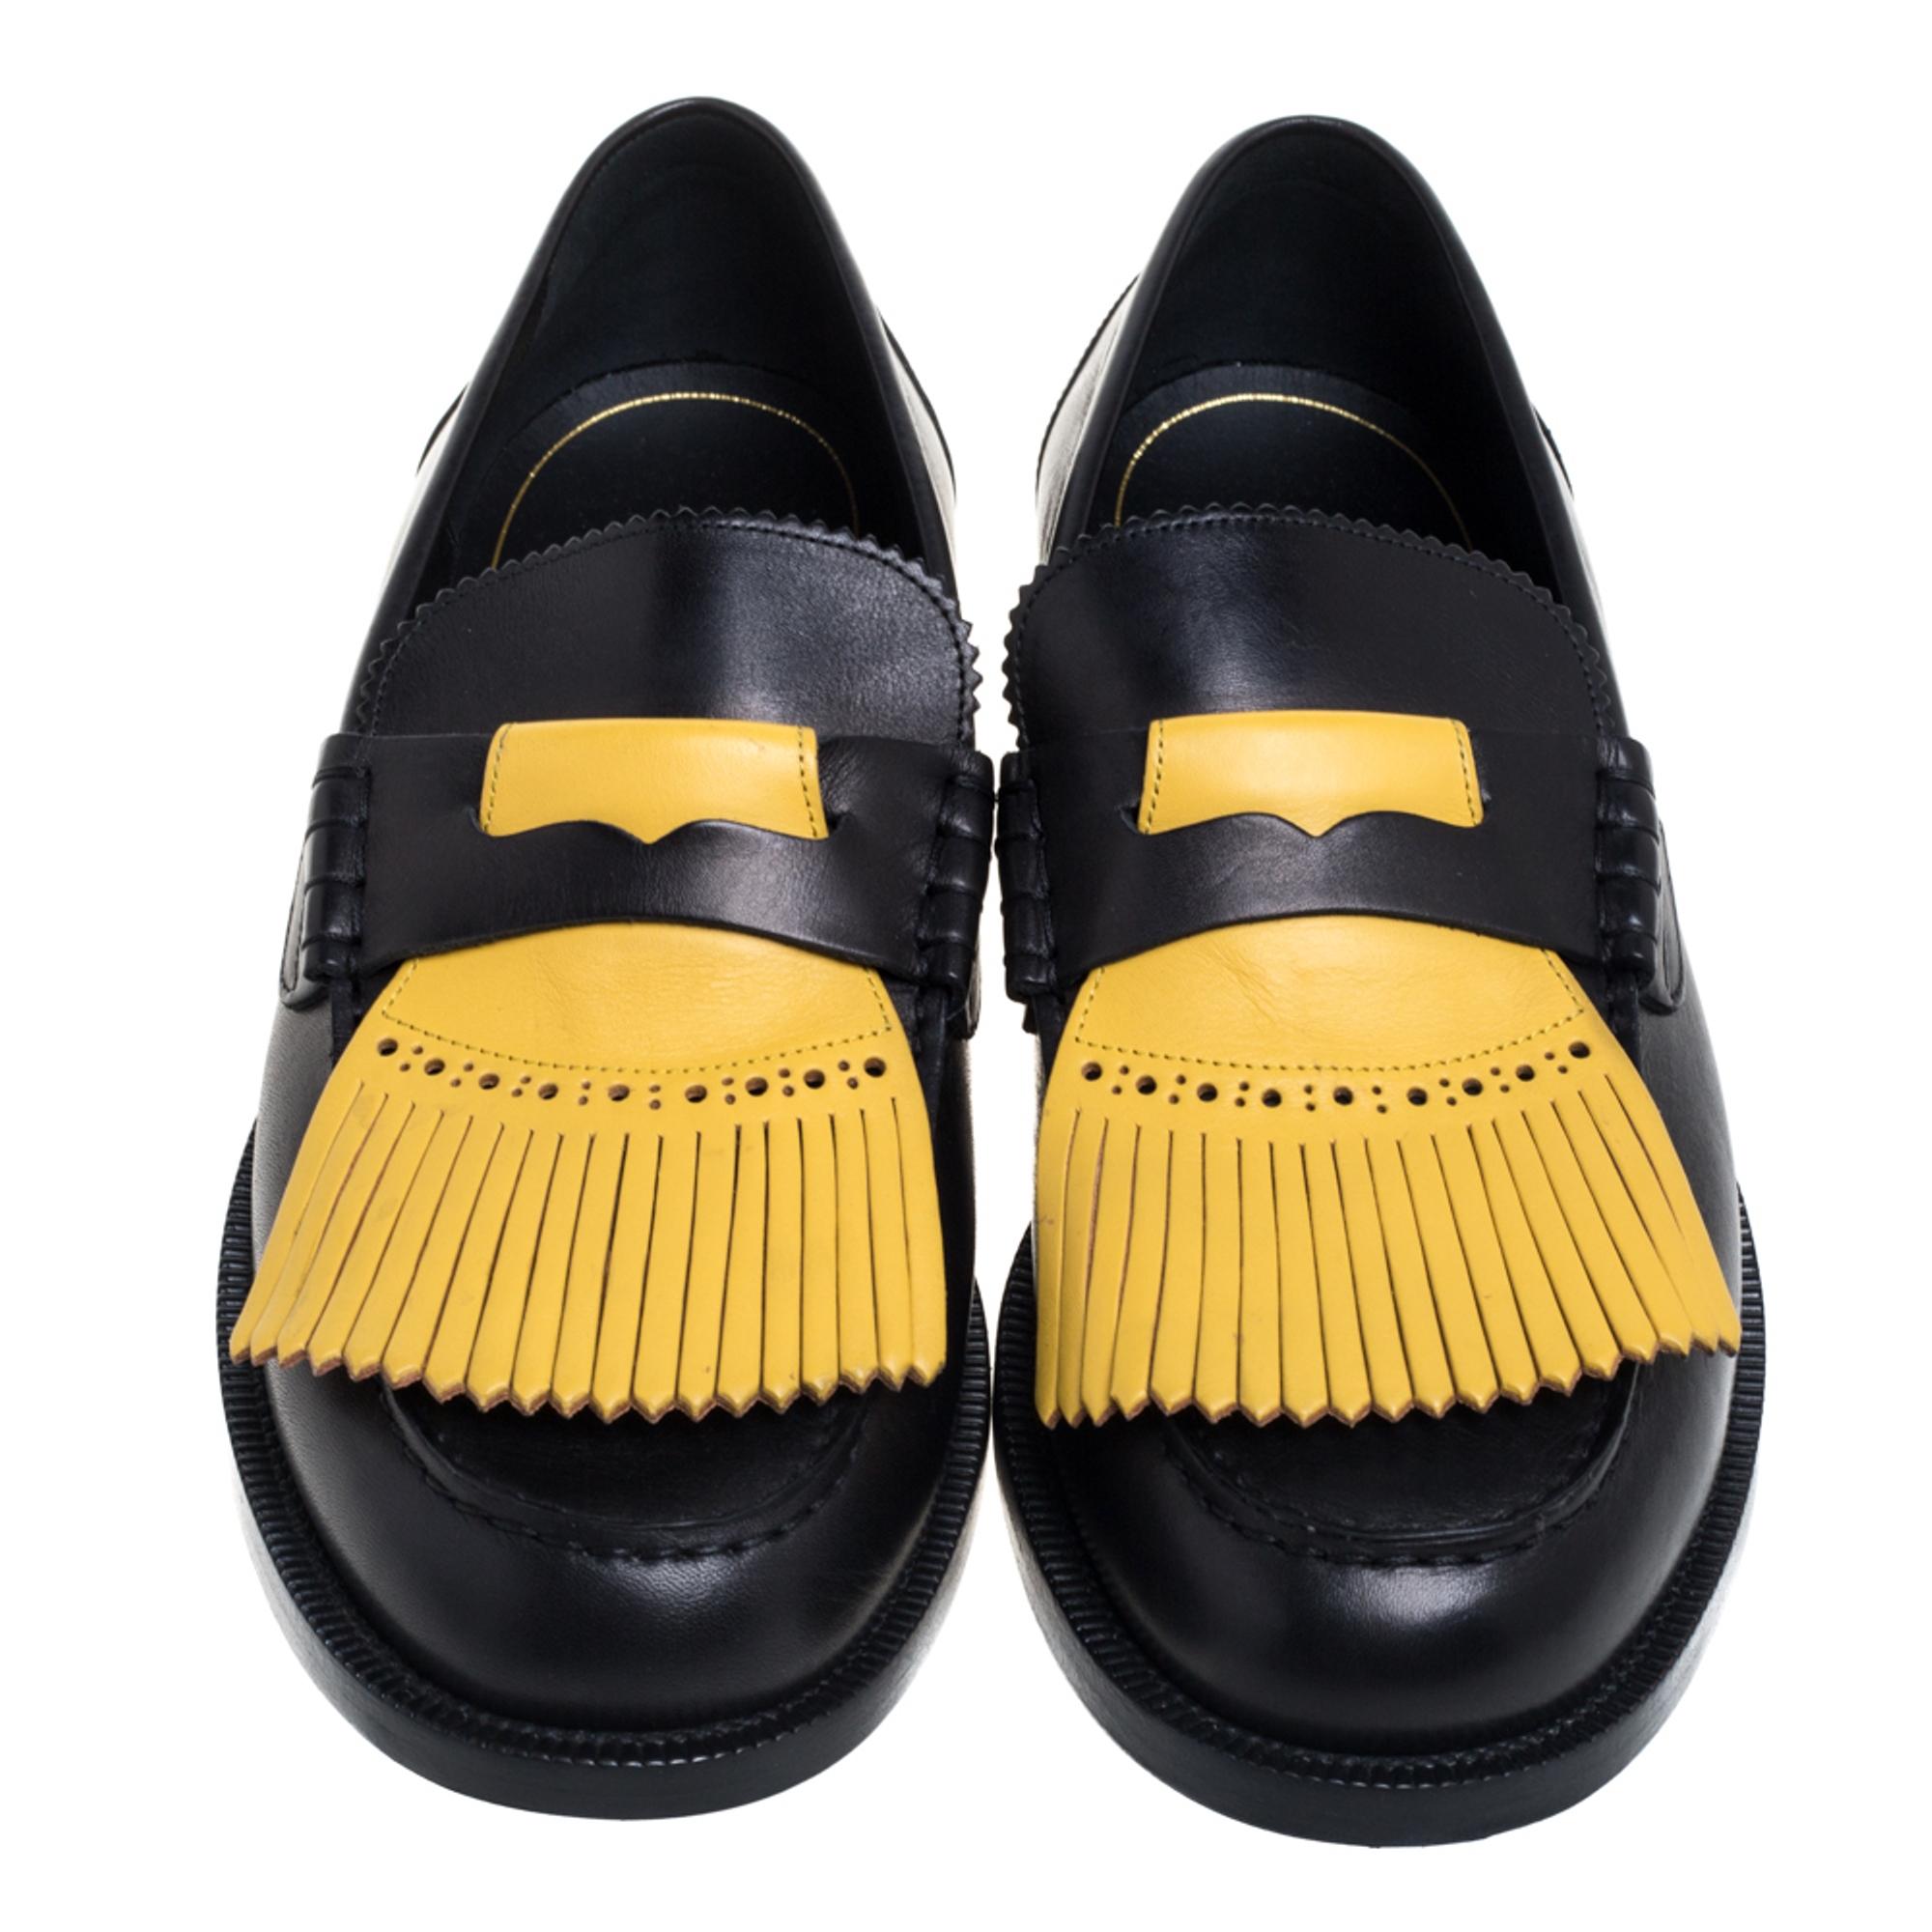 These Bedmoore loafers from Burberry are sure to make you look smart and very stylish! The loafers have been crafted from leather and styled with round toes. They flaunt penny keeper straps along with fringe detailing on the vamps and come equipped